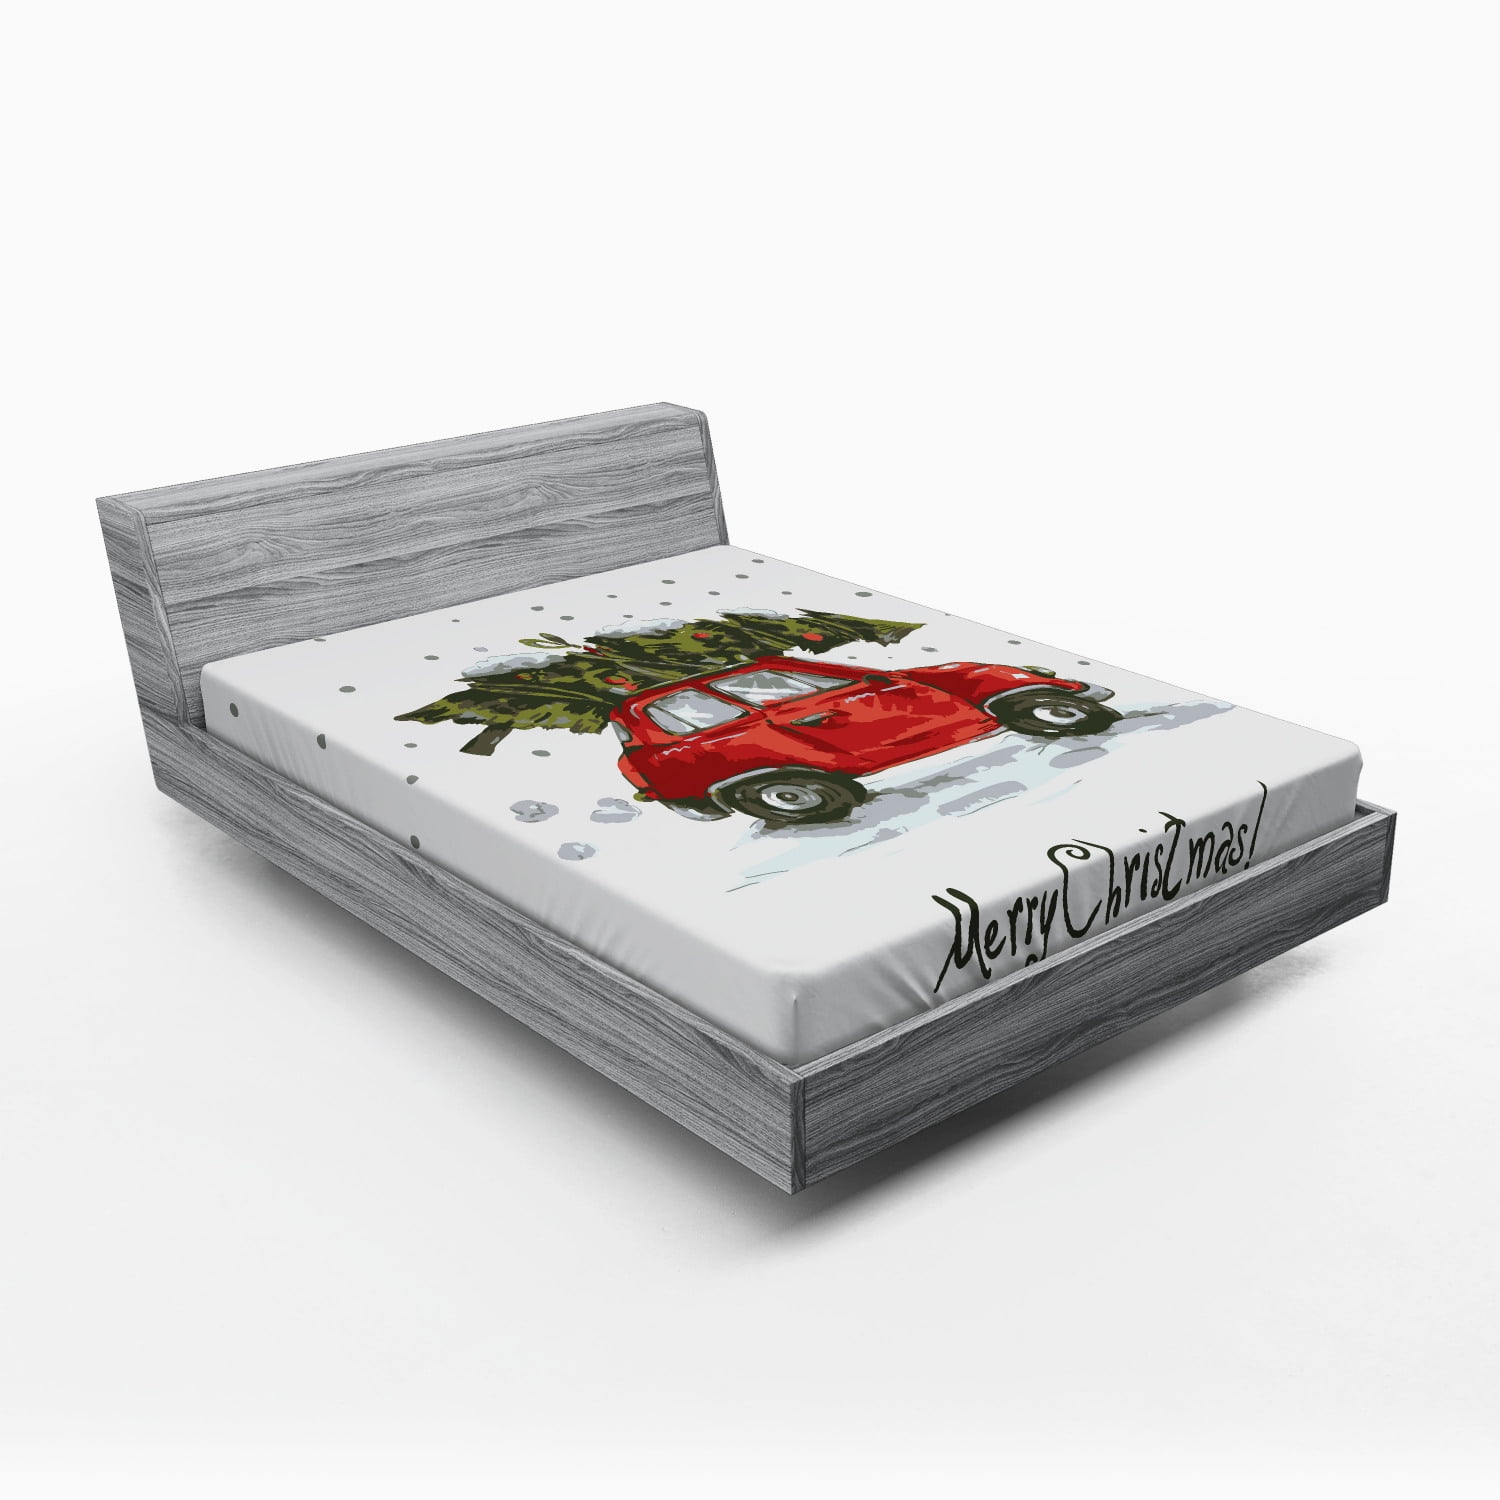 Ambesonne Christmas Duvet Cover Set King Size Red Green Red Retro Style Car Xmas Tree Vintage Family Style Illustration Snowy Winter Art Decorative 3 Piece Bedding Set with 2 Pillow Shams